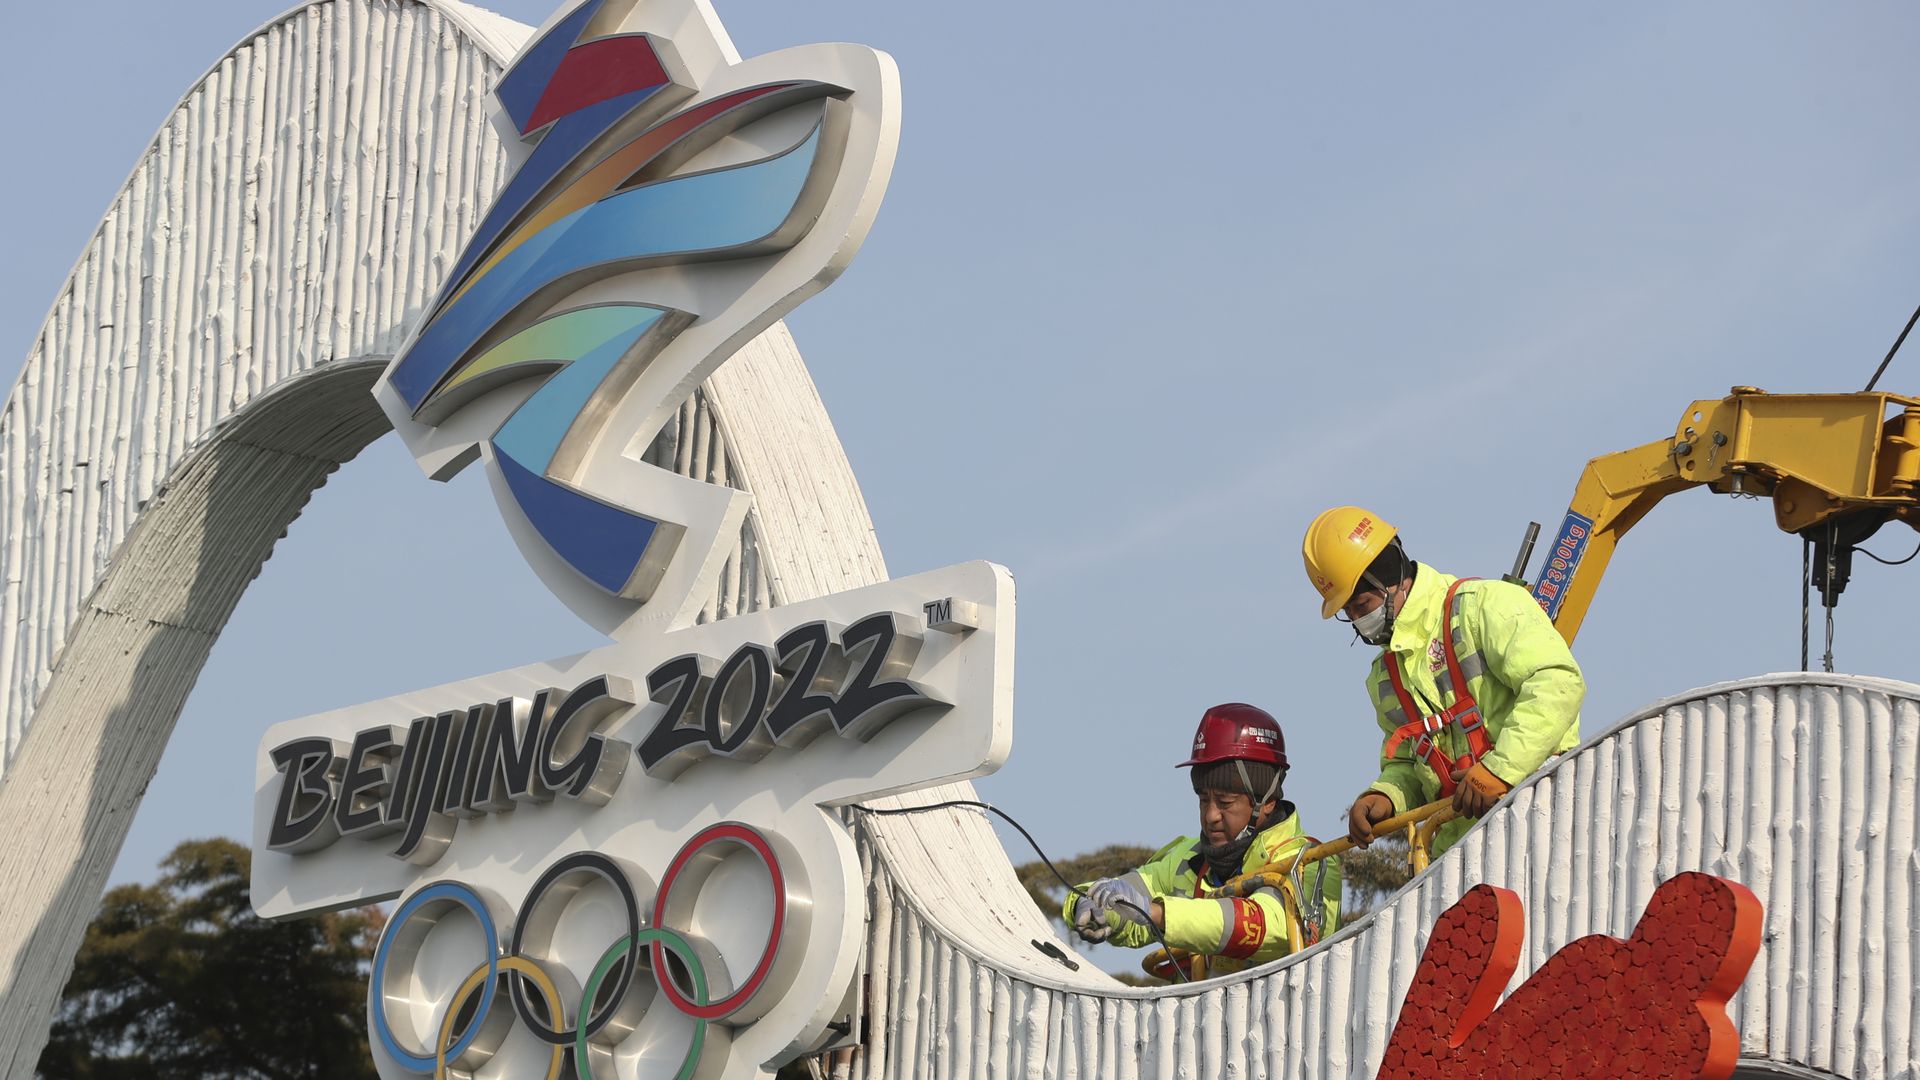 Workers installing a Winter Olympics-themed sign in Beijing on Jan. 14.